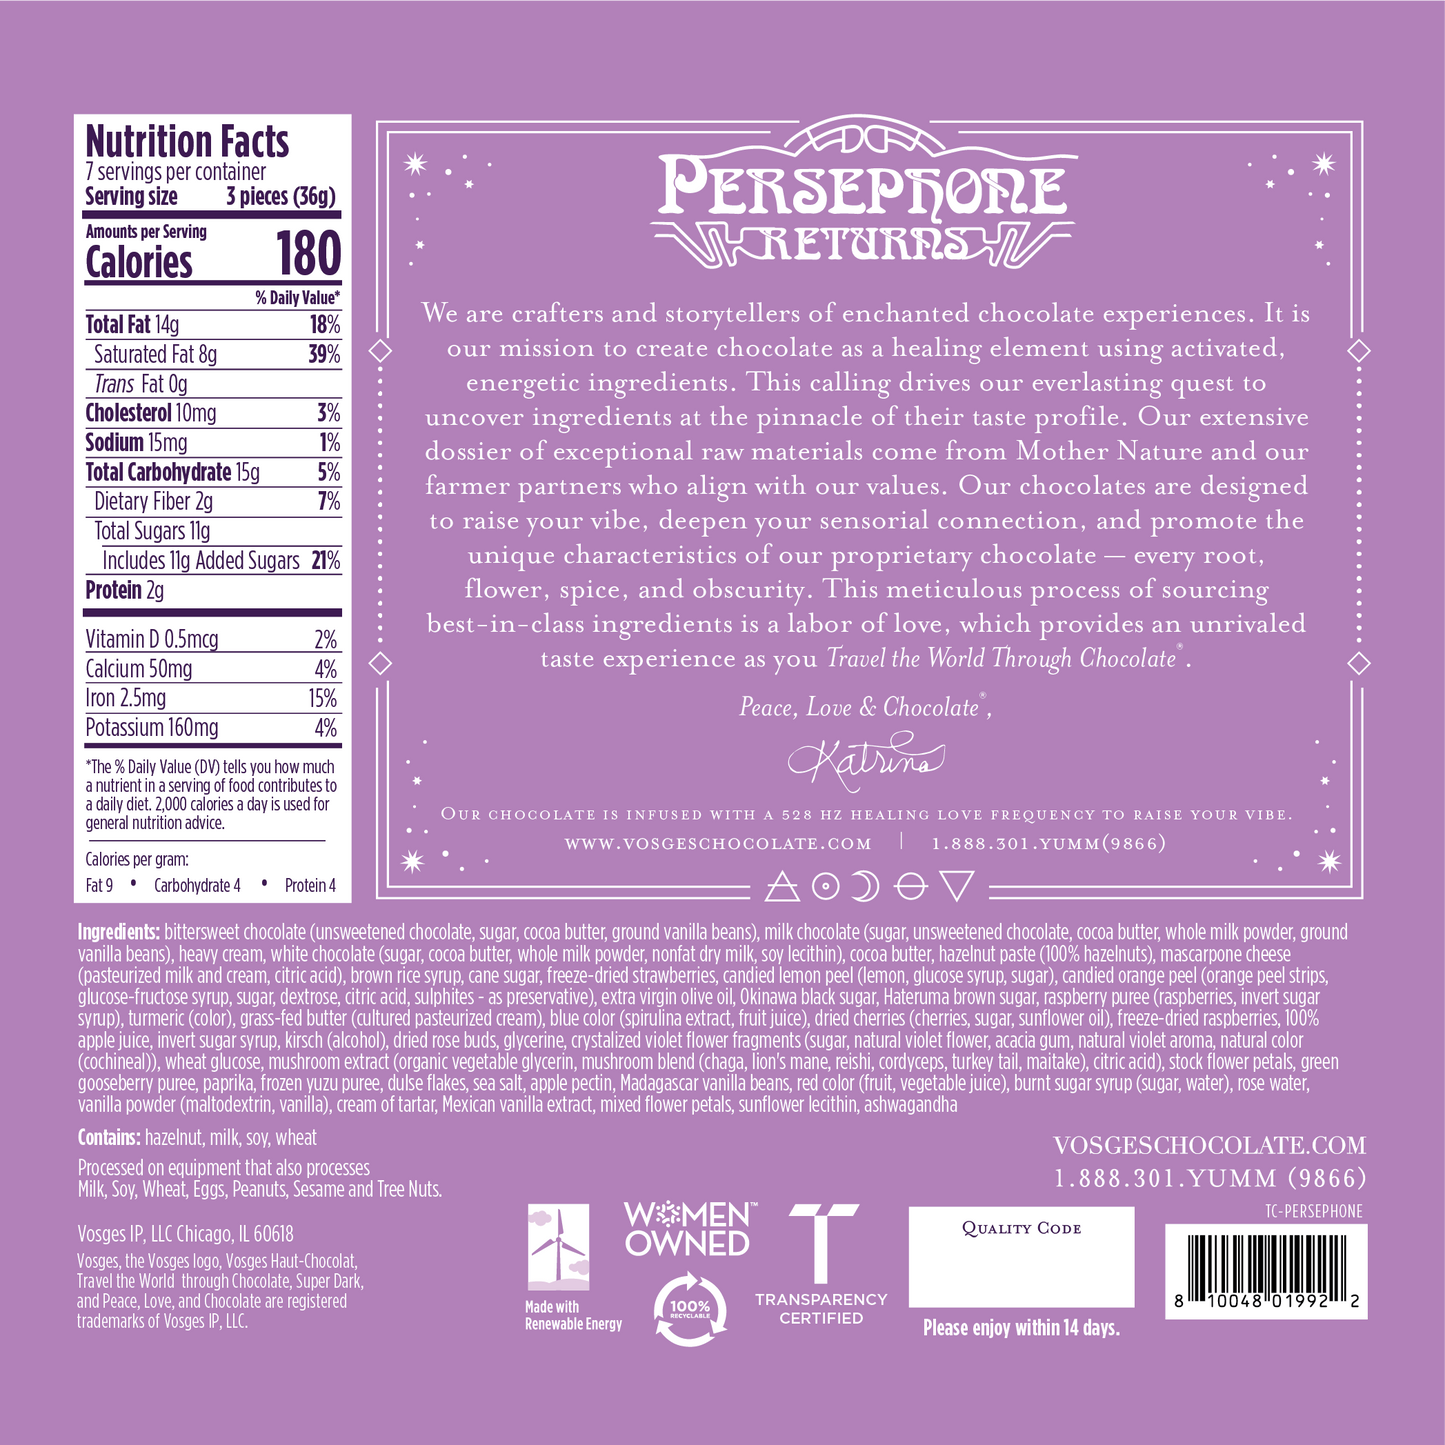 Nutrition Facts and Ingredients of Vosges Haut-Chocolat Persephone Returns in white text, san-serif font on a white background.